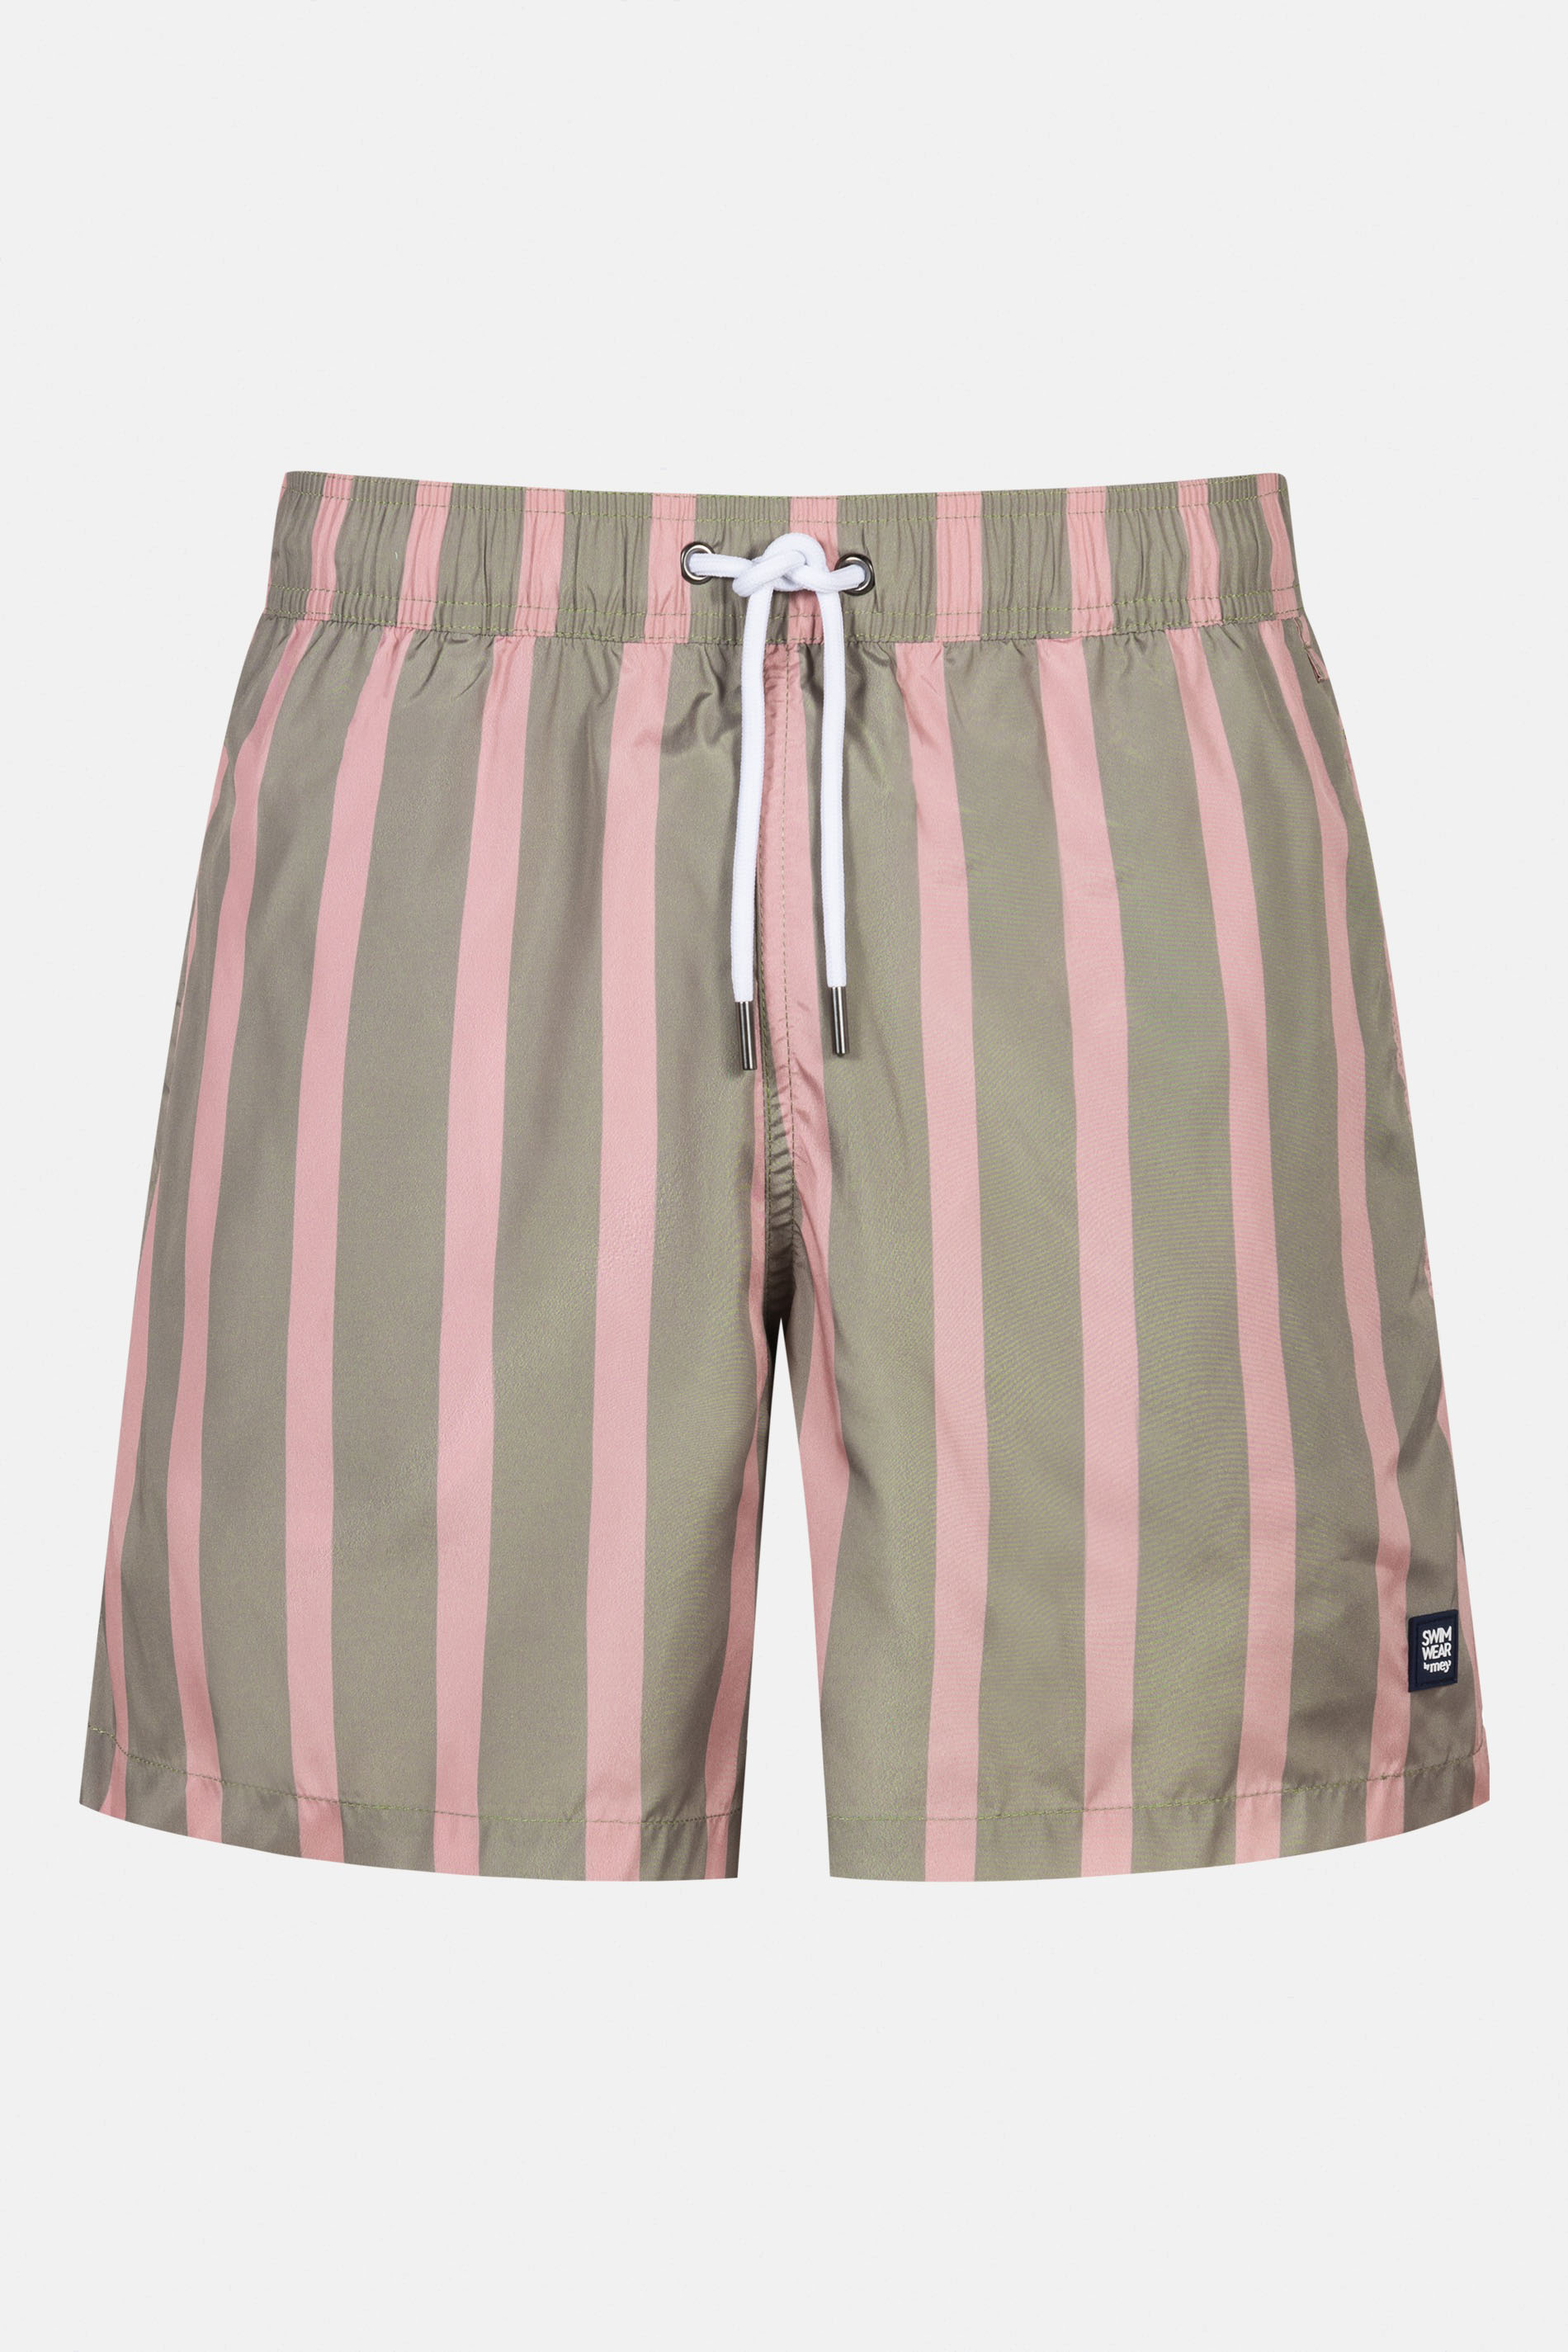 Zwemshorts Serie Preppy Lines Uitknippen | mey®